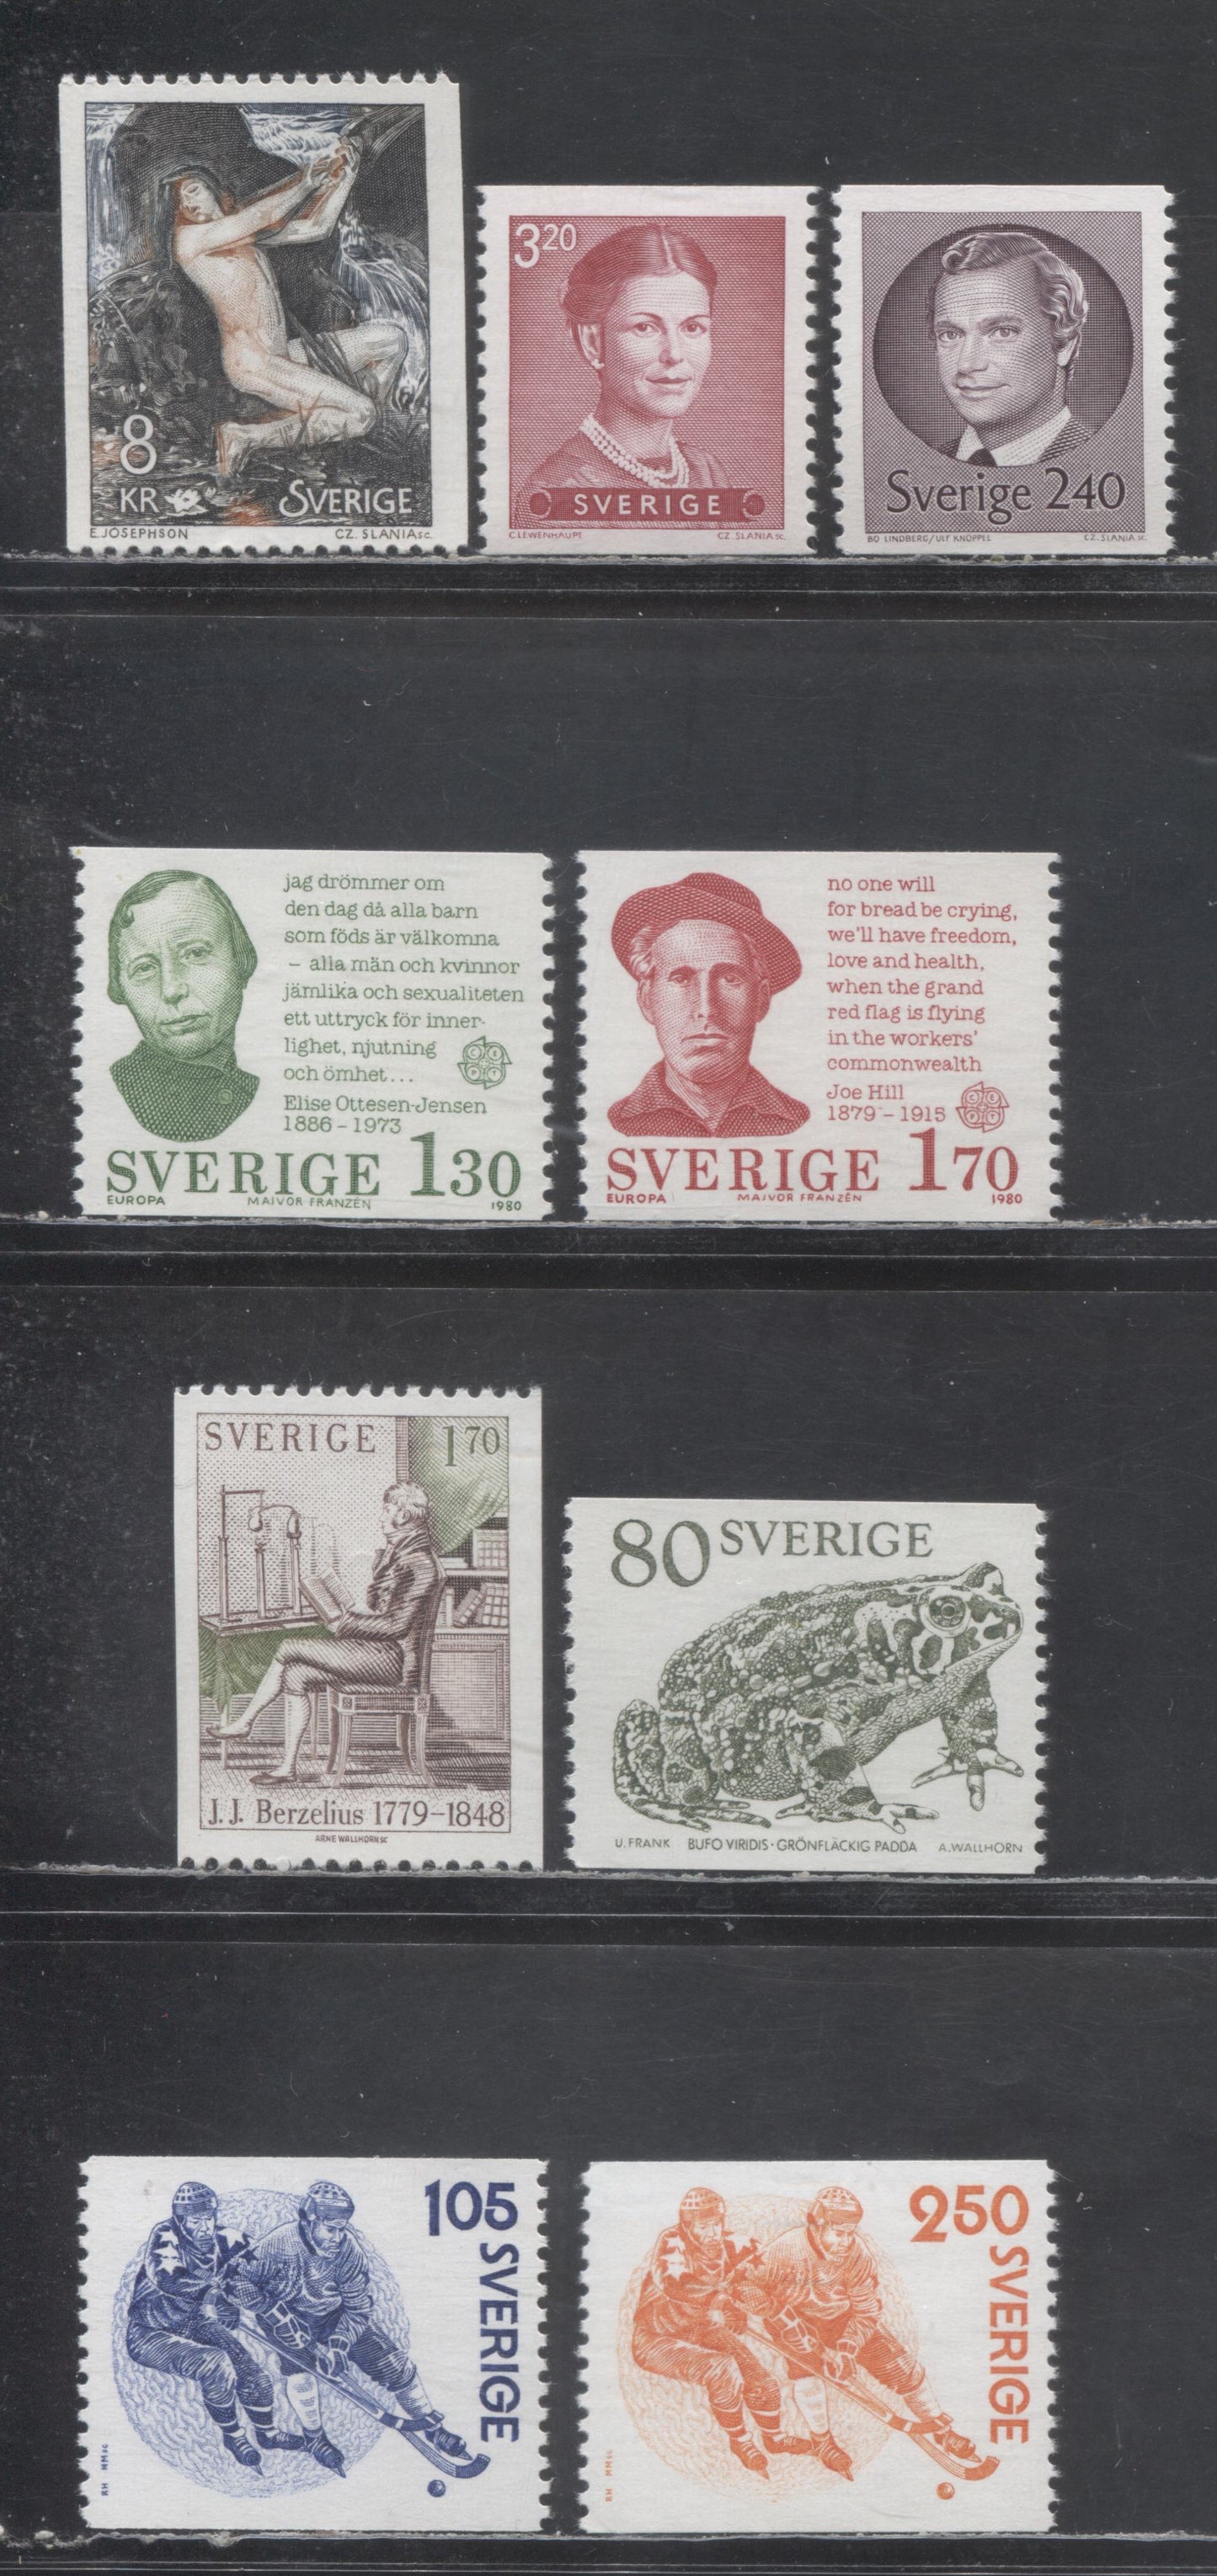 Lot 39 Sweden SC#1273/1373 1979 Bandy - 1981-1984 Royal Family Definitive Issues, With Control Numbers On Back, 9 VFNH Singles, Click on Listing to See ALL Pictures, Estimated Value $15